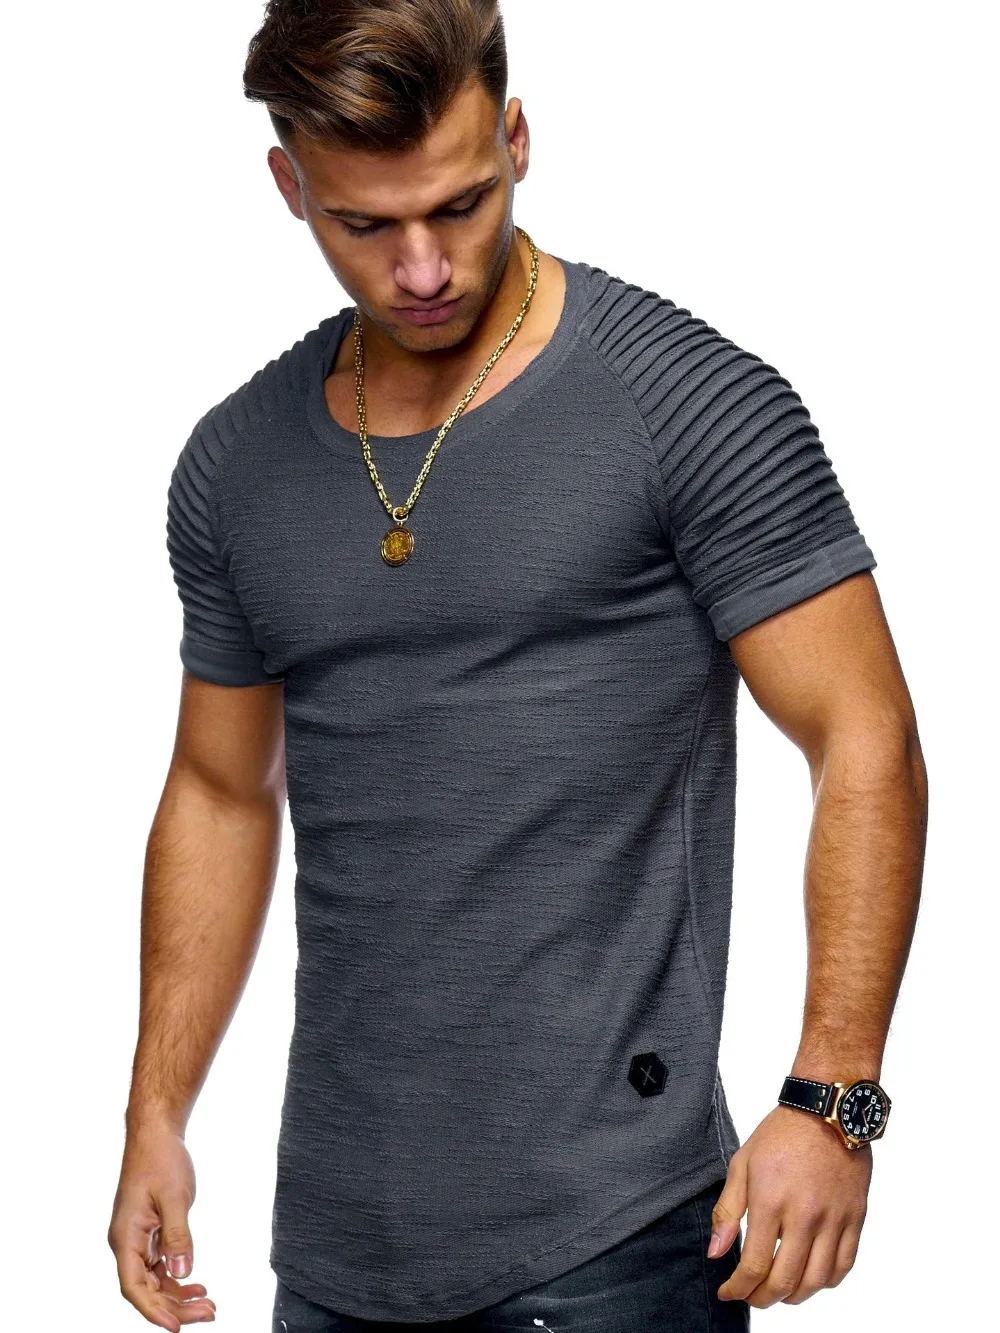 

2856-Summer short-sleeved t-shirt men's Korean version of the men's bottoming shirt round neck clothes compassionate